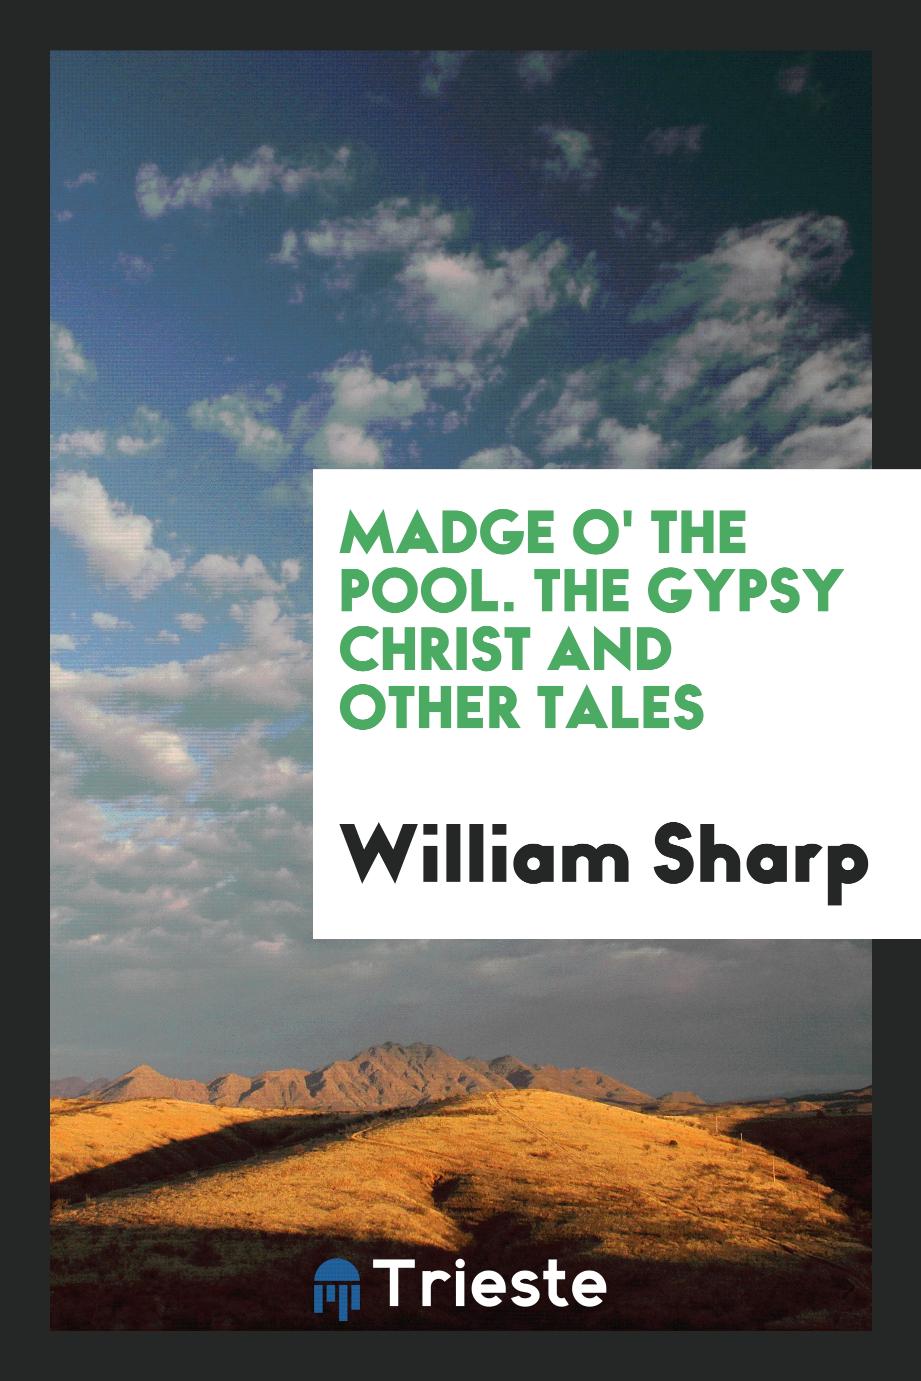 Madge O' the Pool. The Gypsy Christ and Other Tales